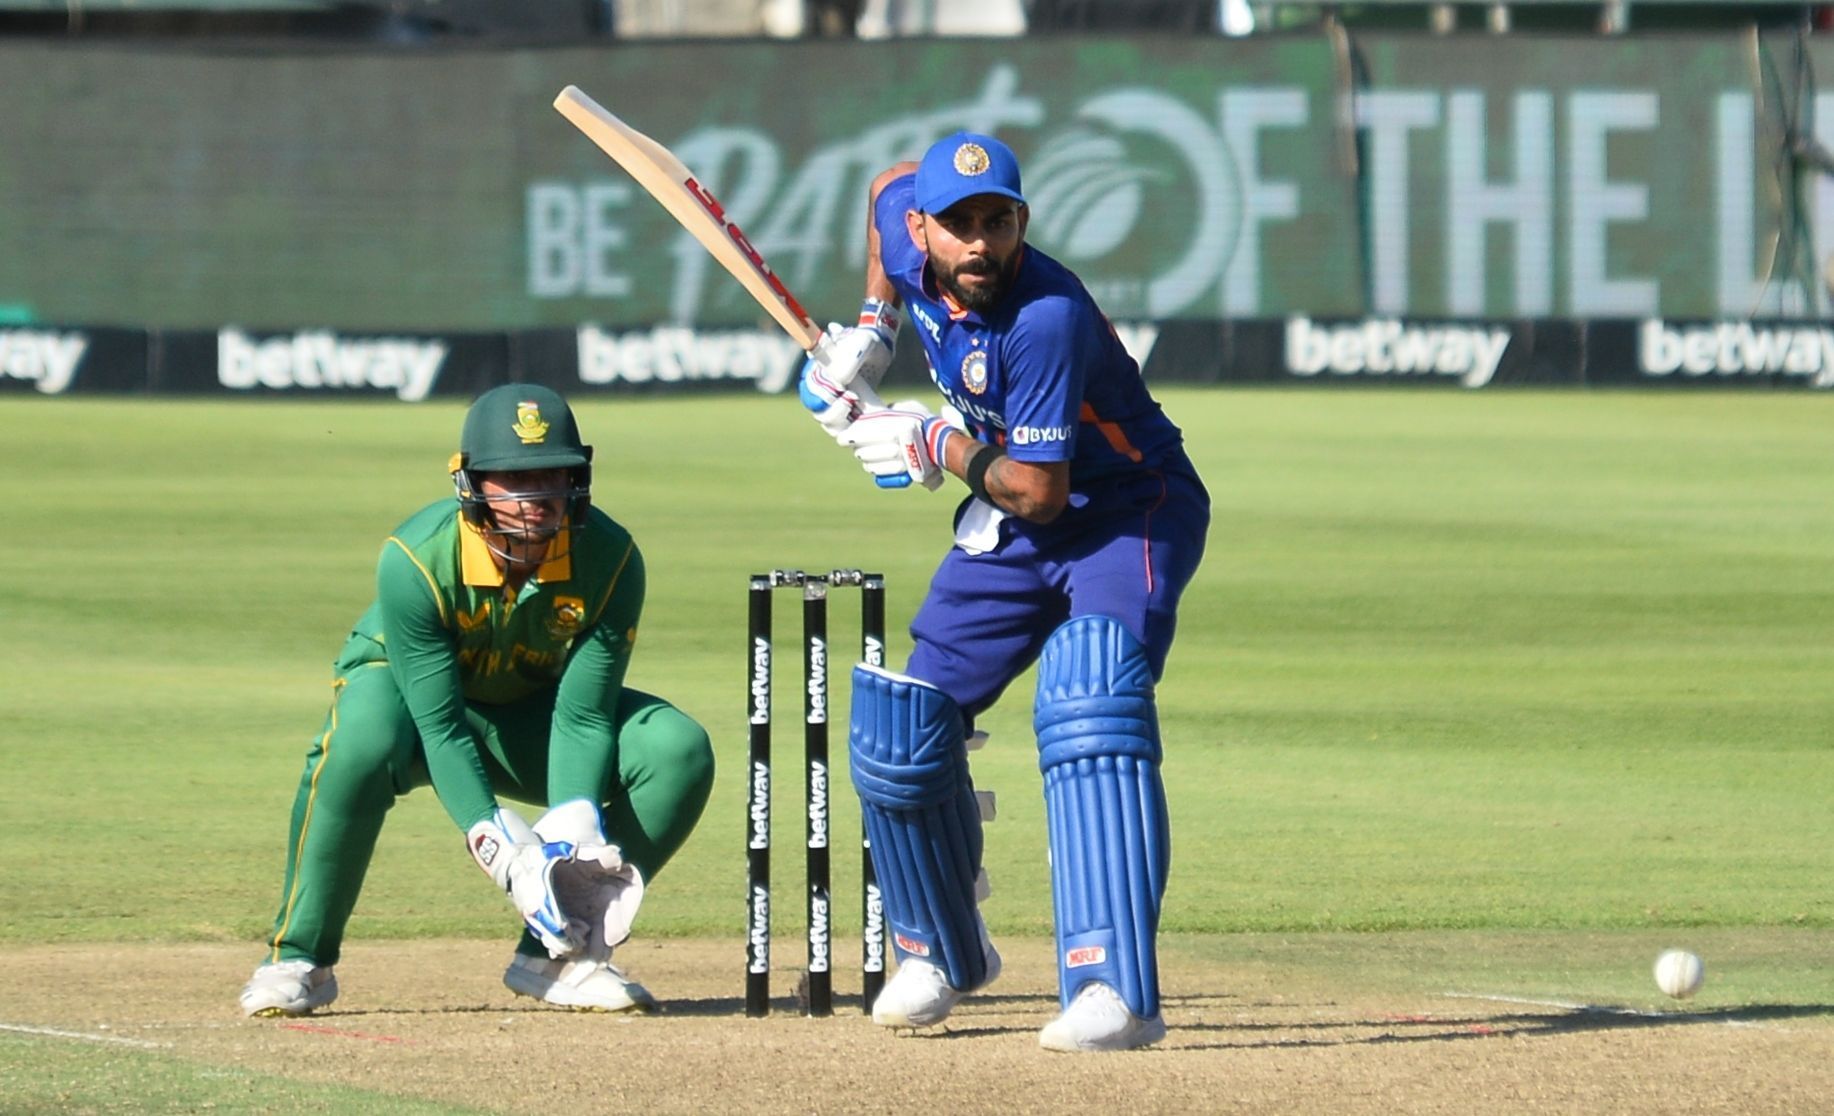 Virat Kohli has a batting average of more than 75 in ODI matches on South African soil (Image: Getty)